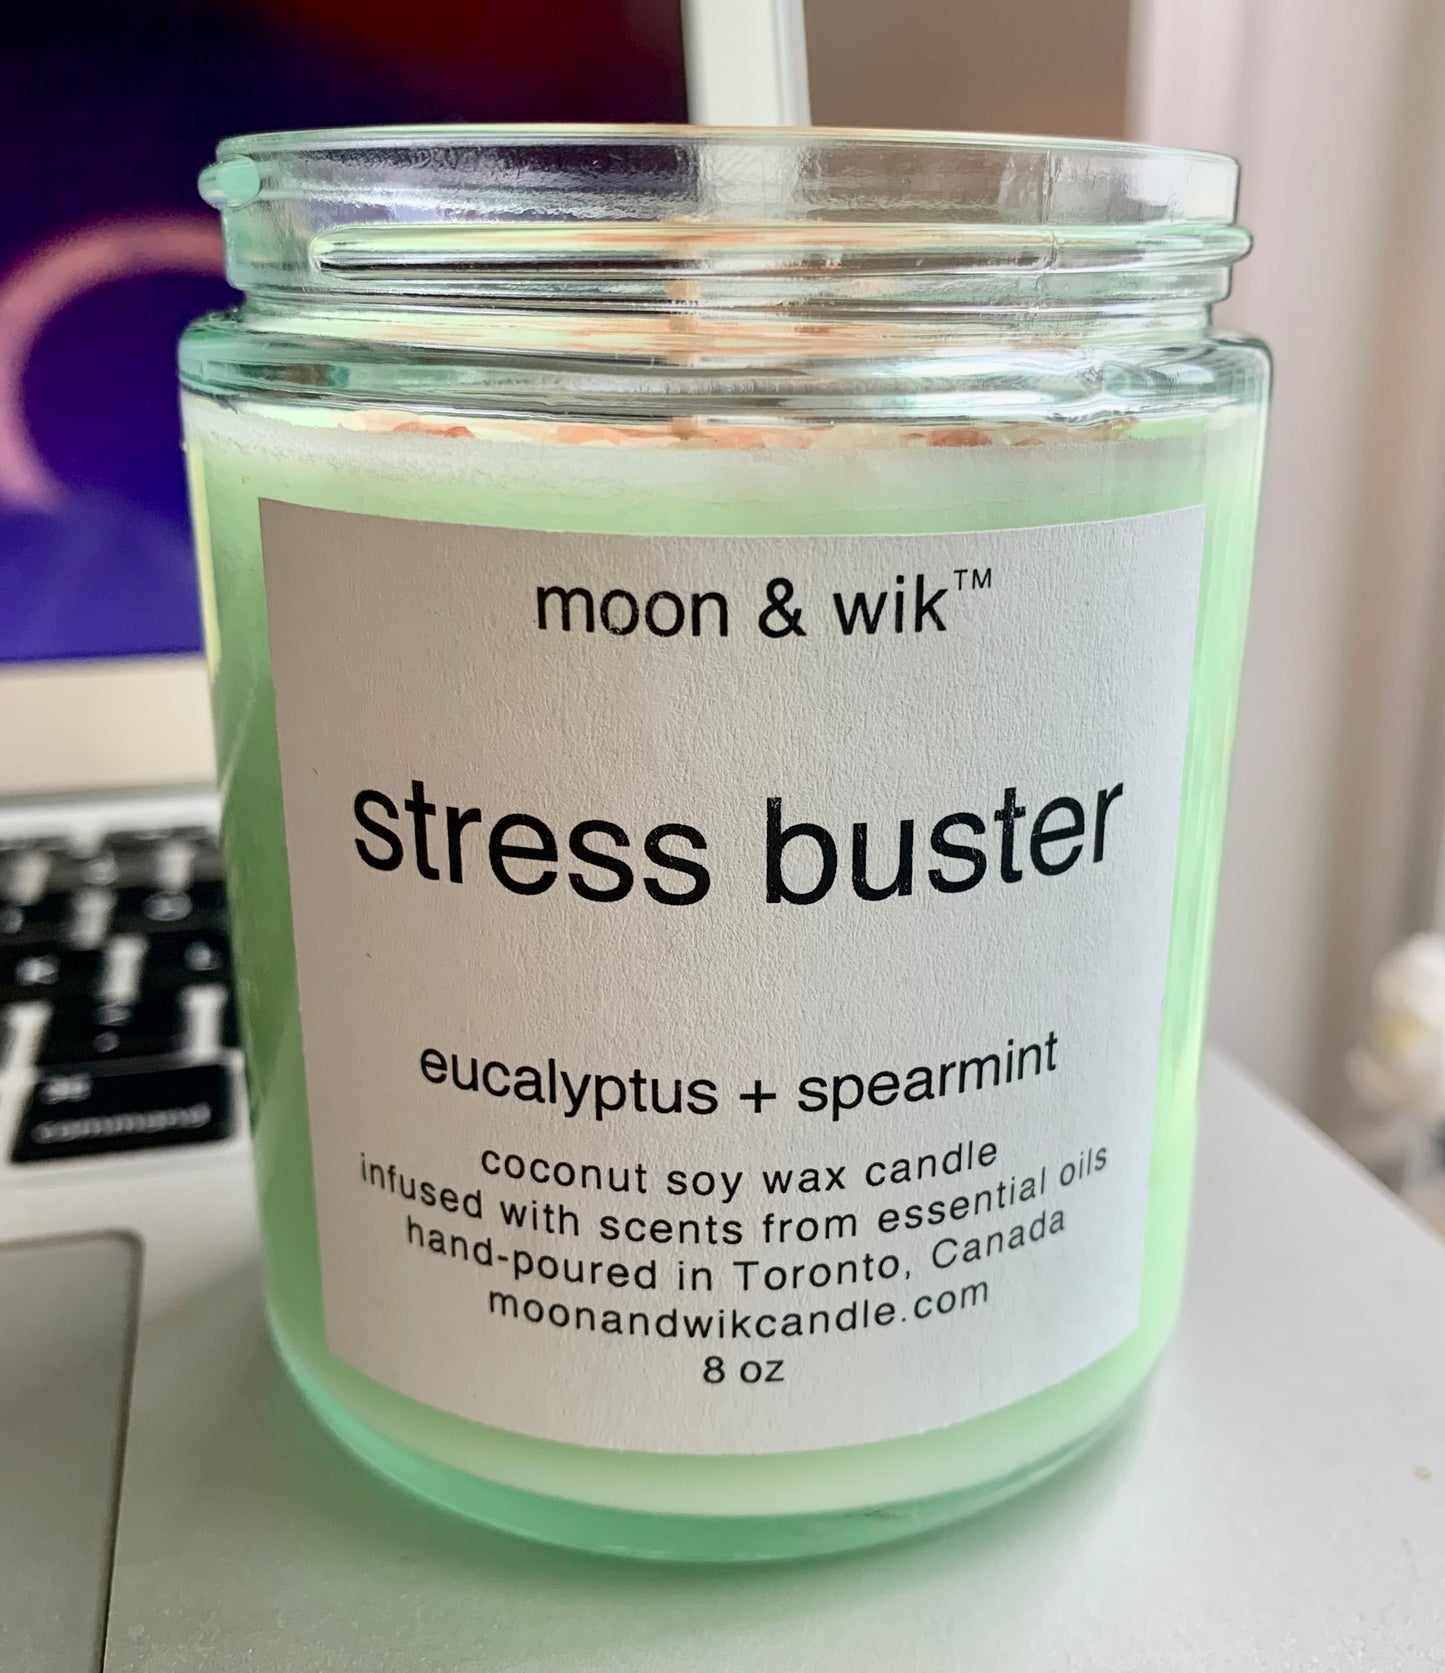 Stress Buster